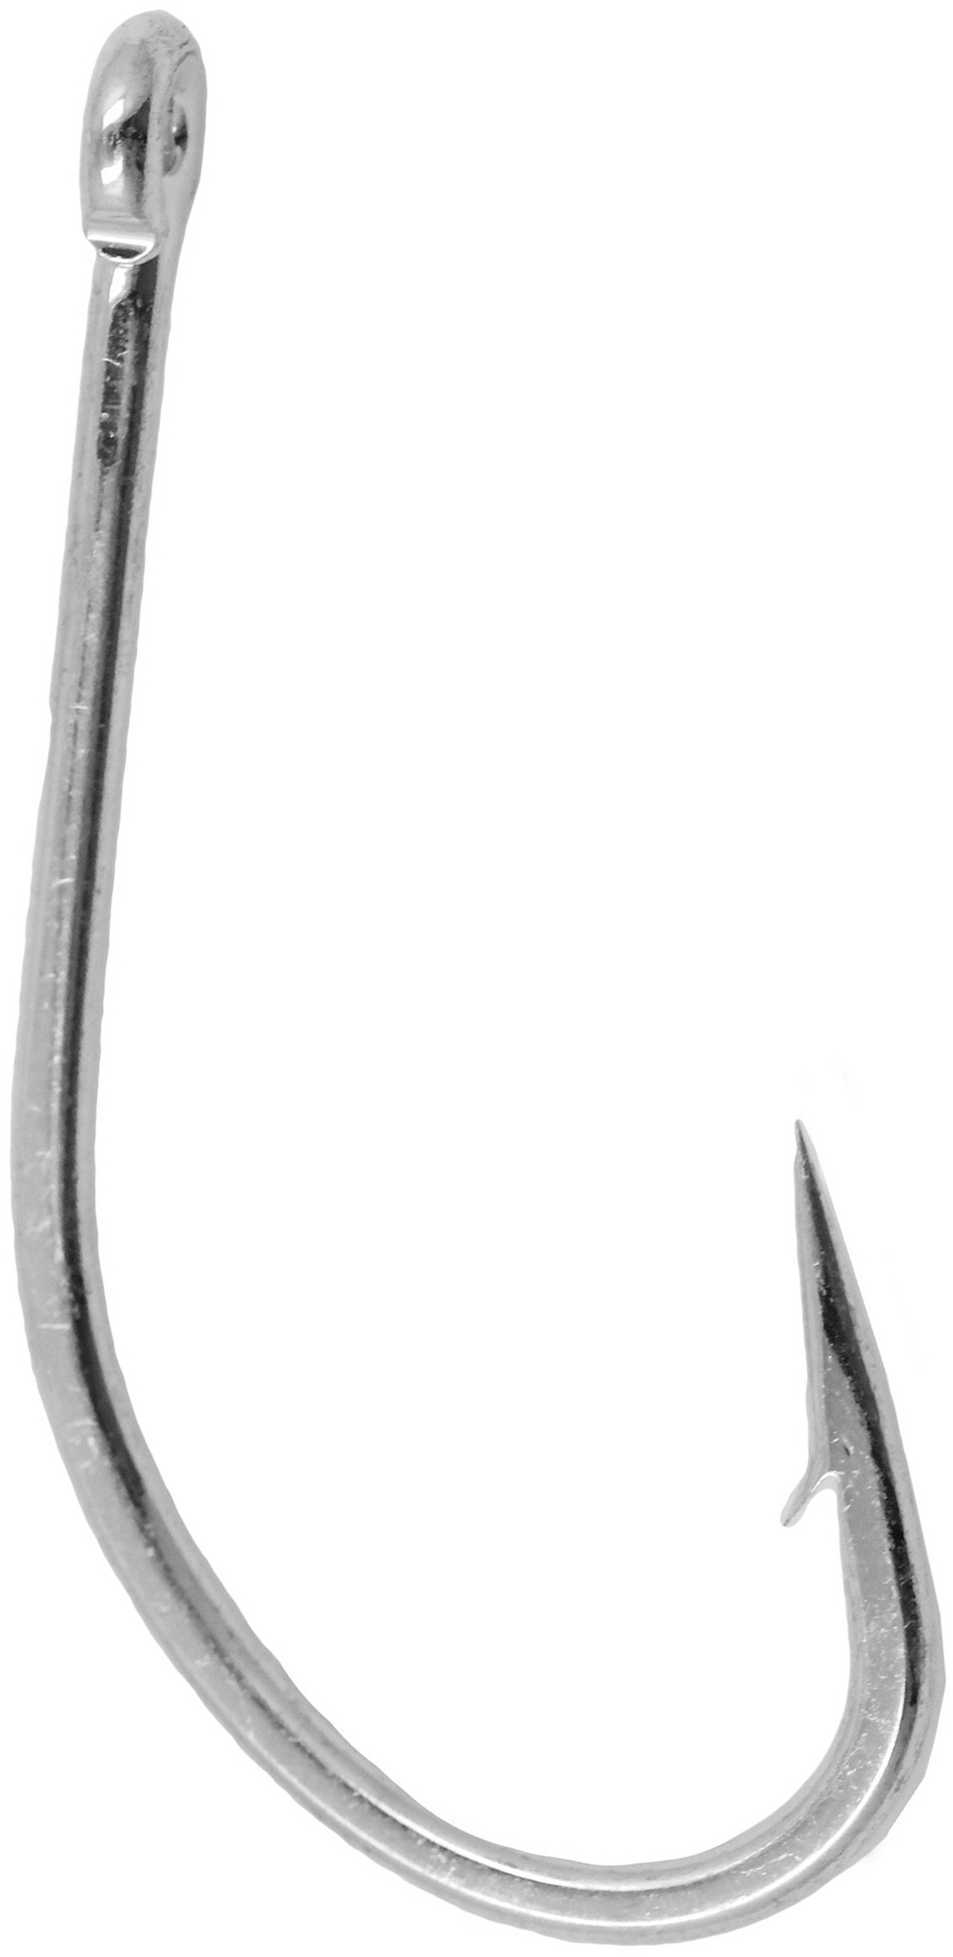 Gamakatsu Wide Gap 2X Strong Saltwater Series Fly Hook, Tin Size 3/0 Md: 211513-10